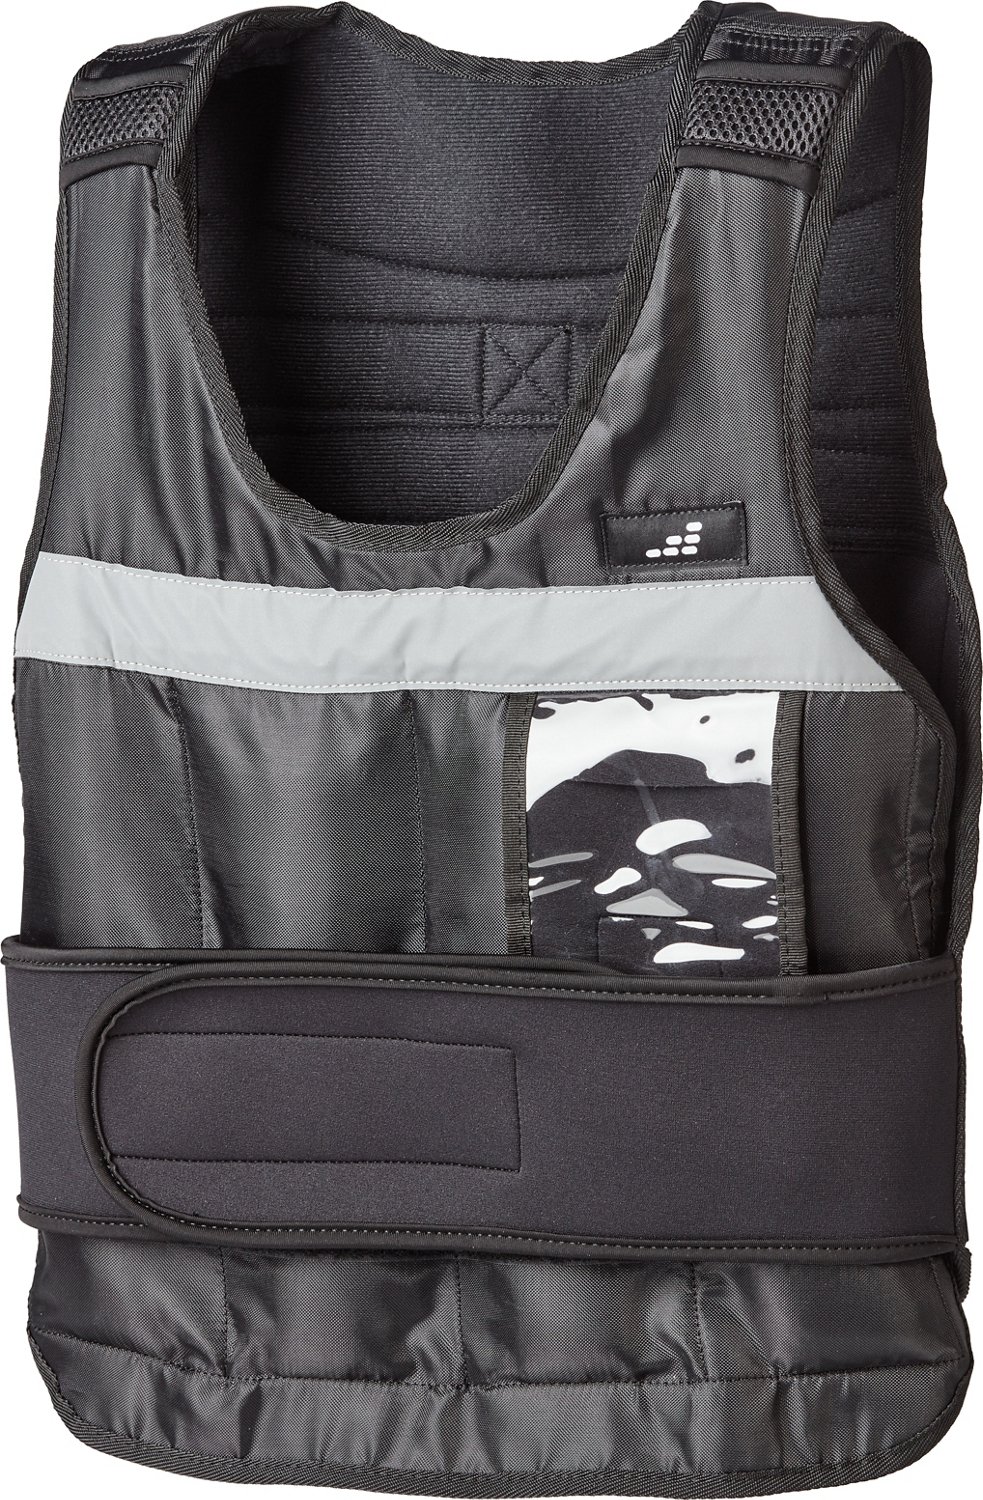 20 Lb. Adjustable Weighted Vest